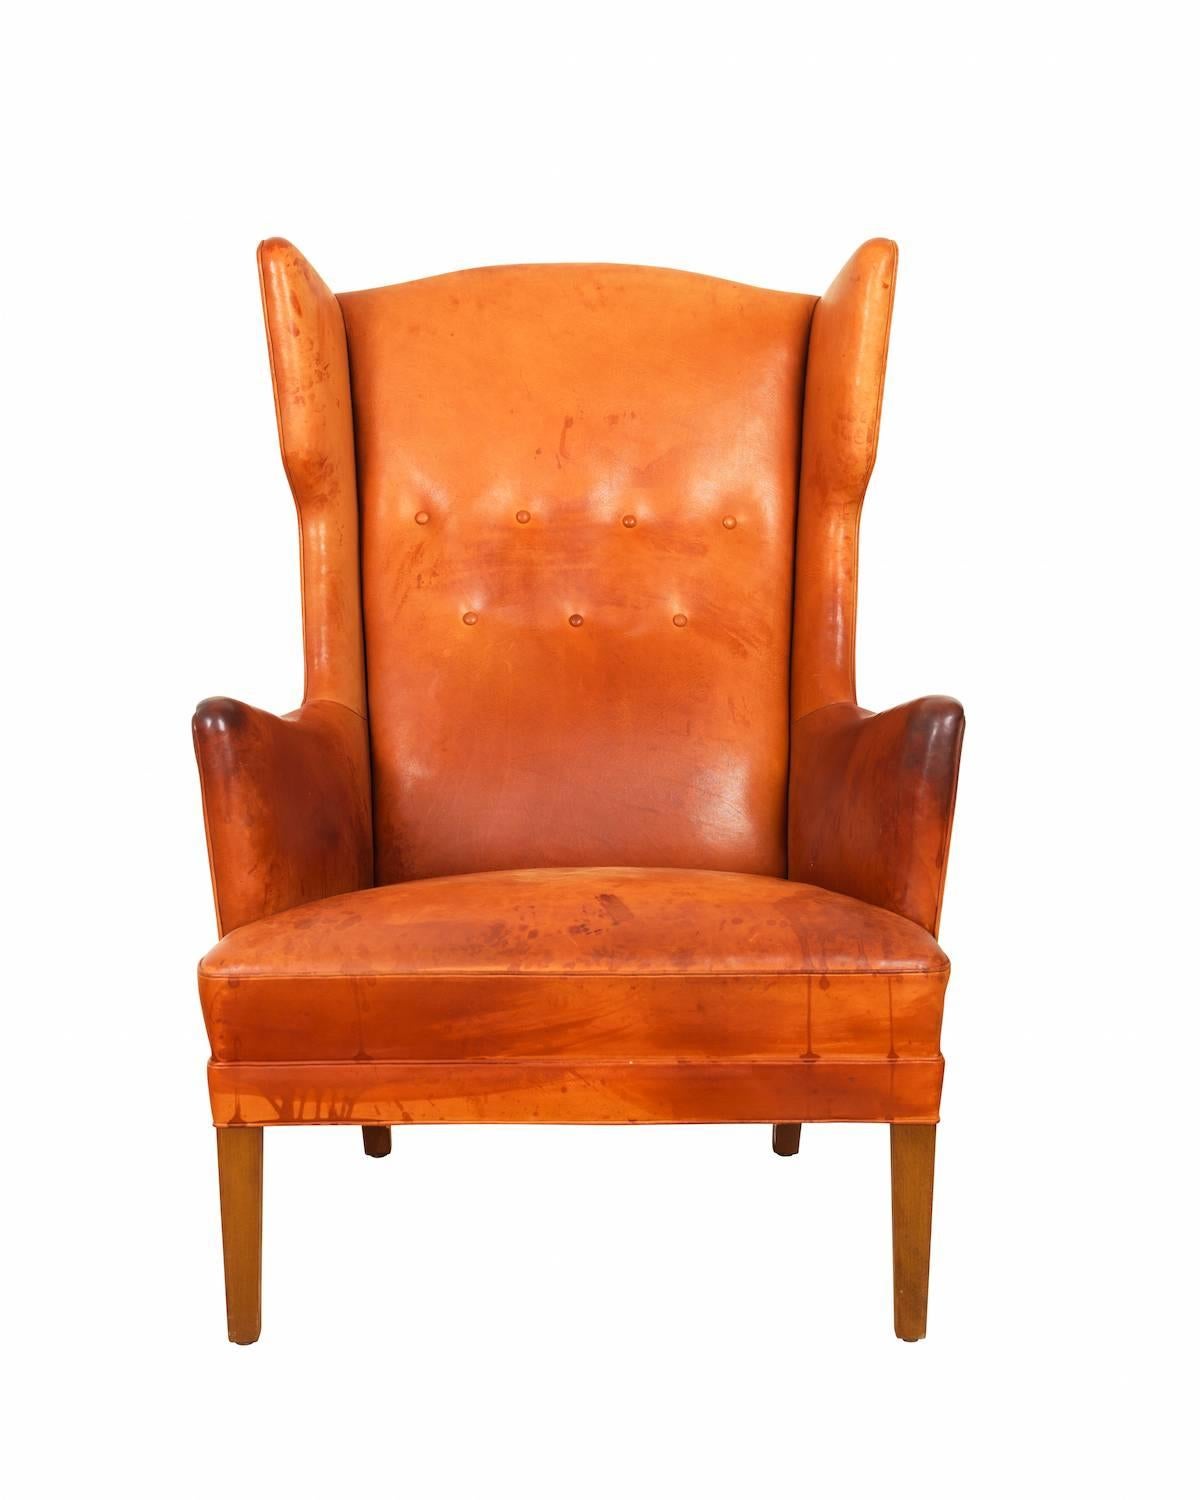 Rare wing chair by Frits Henningsen, dated 1950s with original cognac vegetal leather upholstery.

Slightly curved armrests, square and slightly tapered dark-stained wood legs.

Leather with patina.

Produced by master cabinetmaker Frits